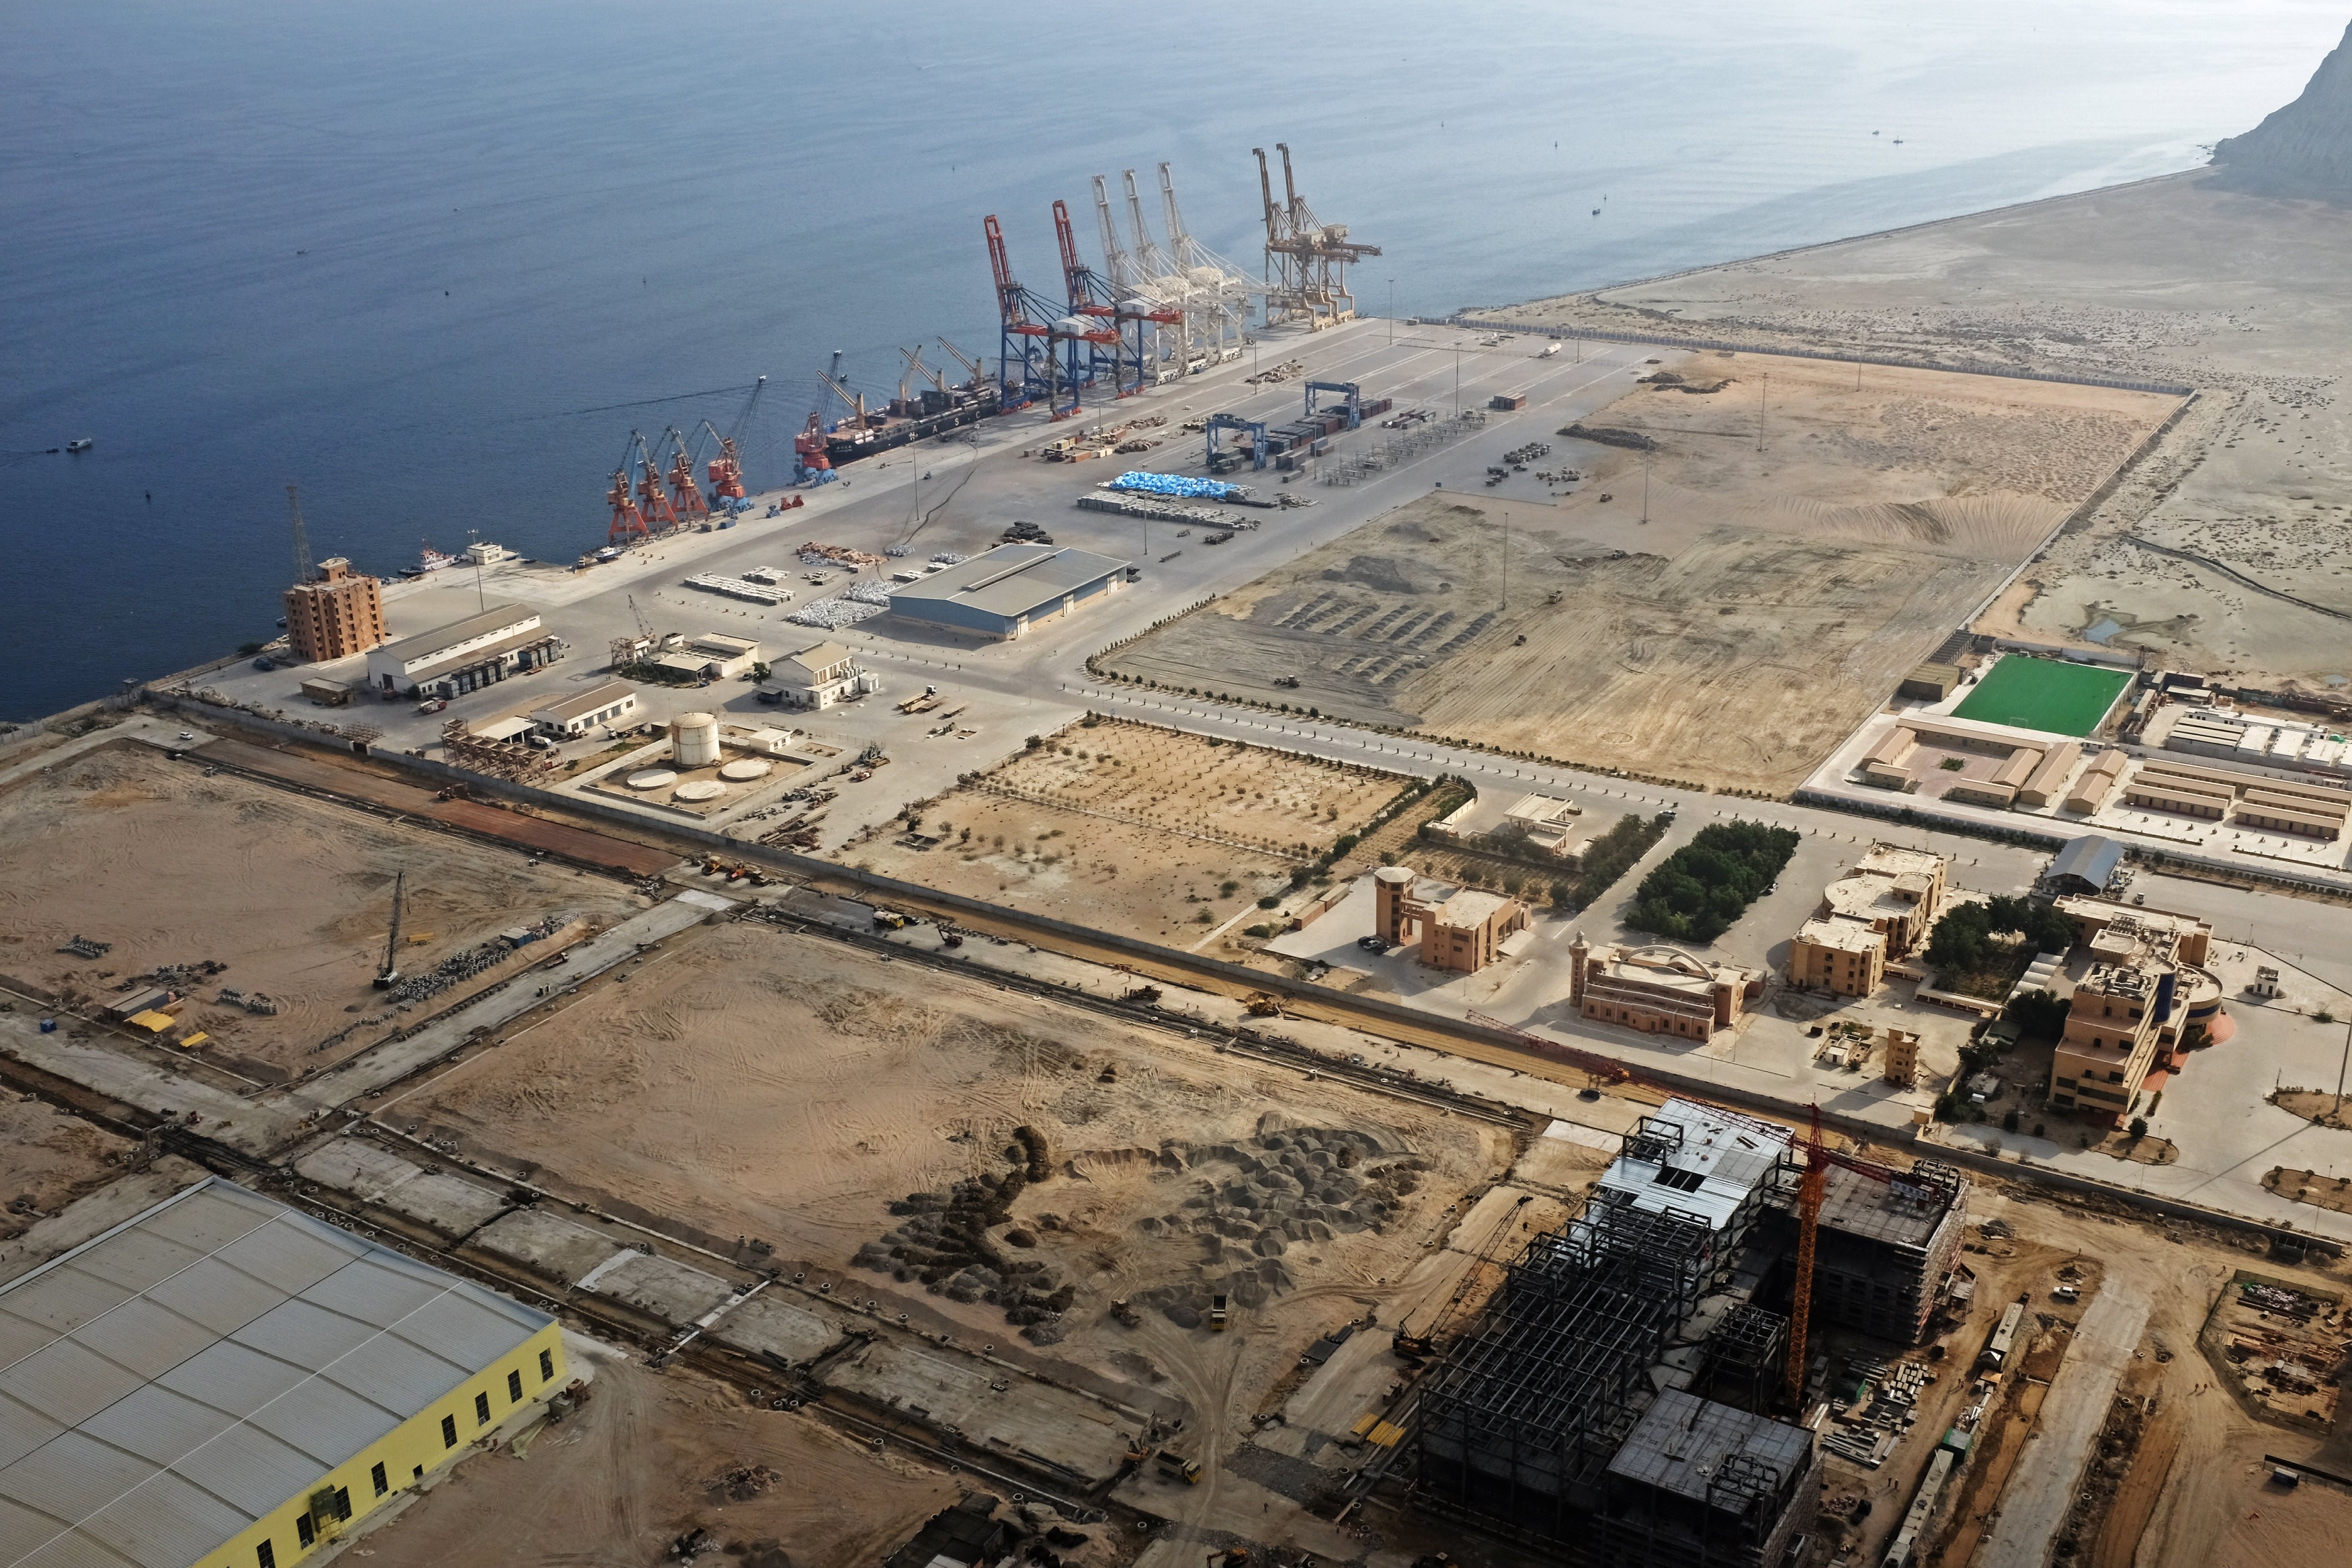 The initiative faces many challenges. For instance, Gwador Port, a key part of the BRI in Pakistan that connects to Xinjiang in western China, was attacked by terrorists last October. Photo: Reuters